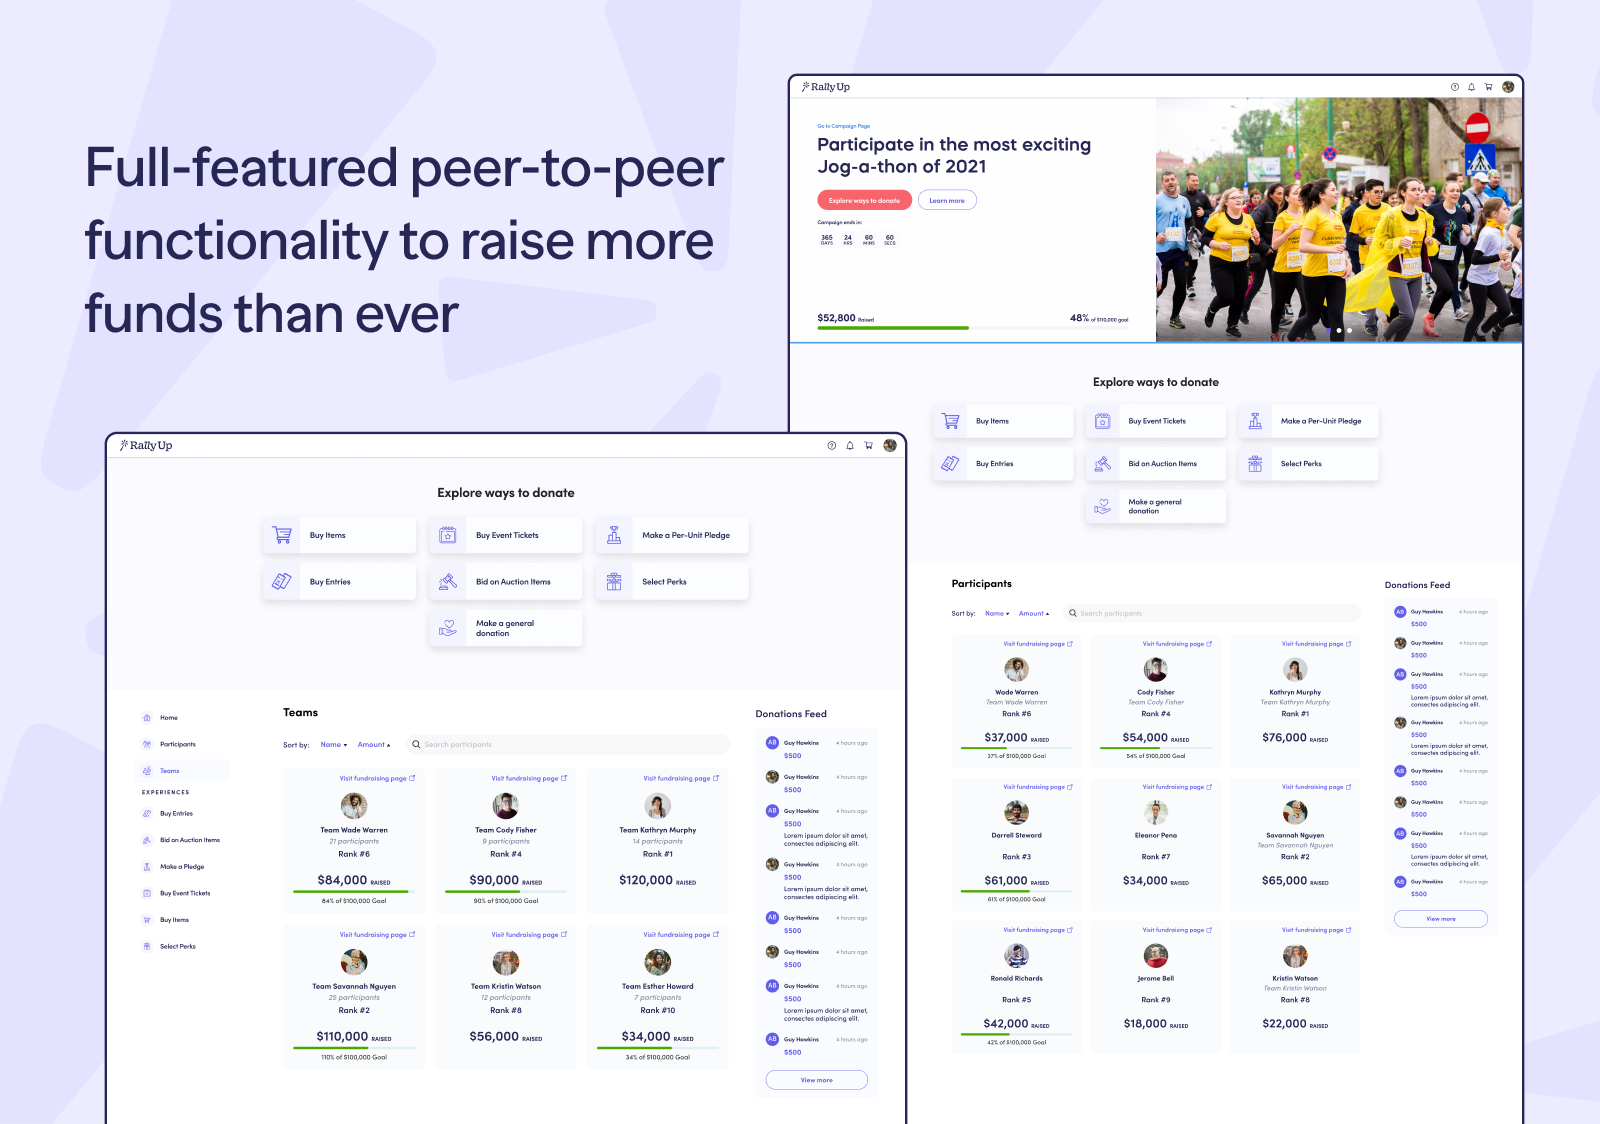 Full-featured peer-to-peer functionality to raise more funds than ever